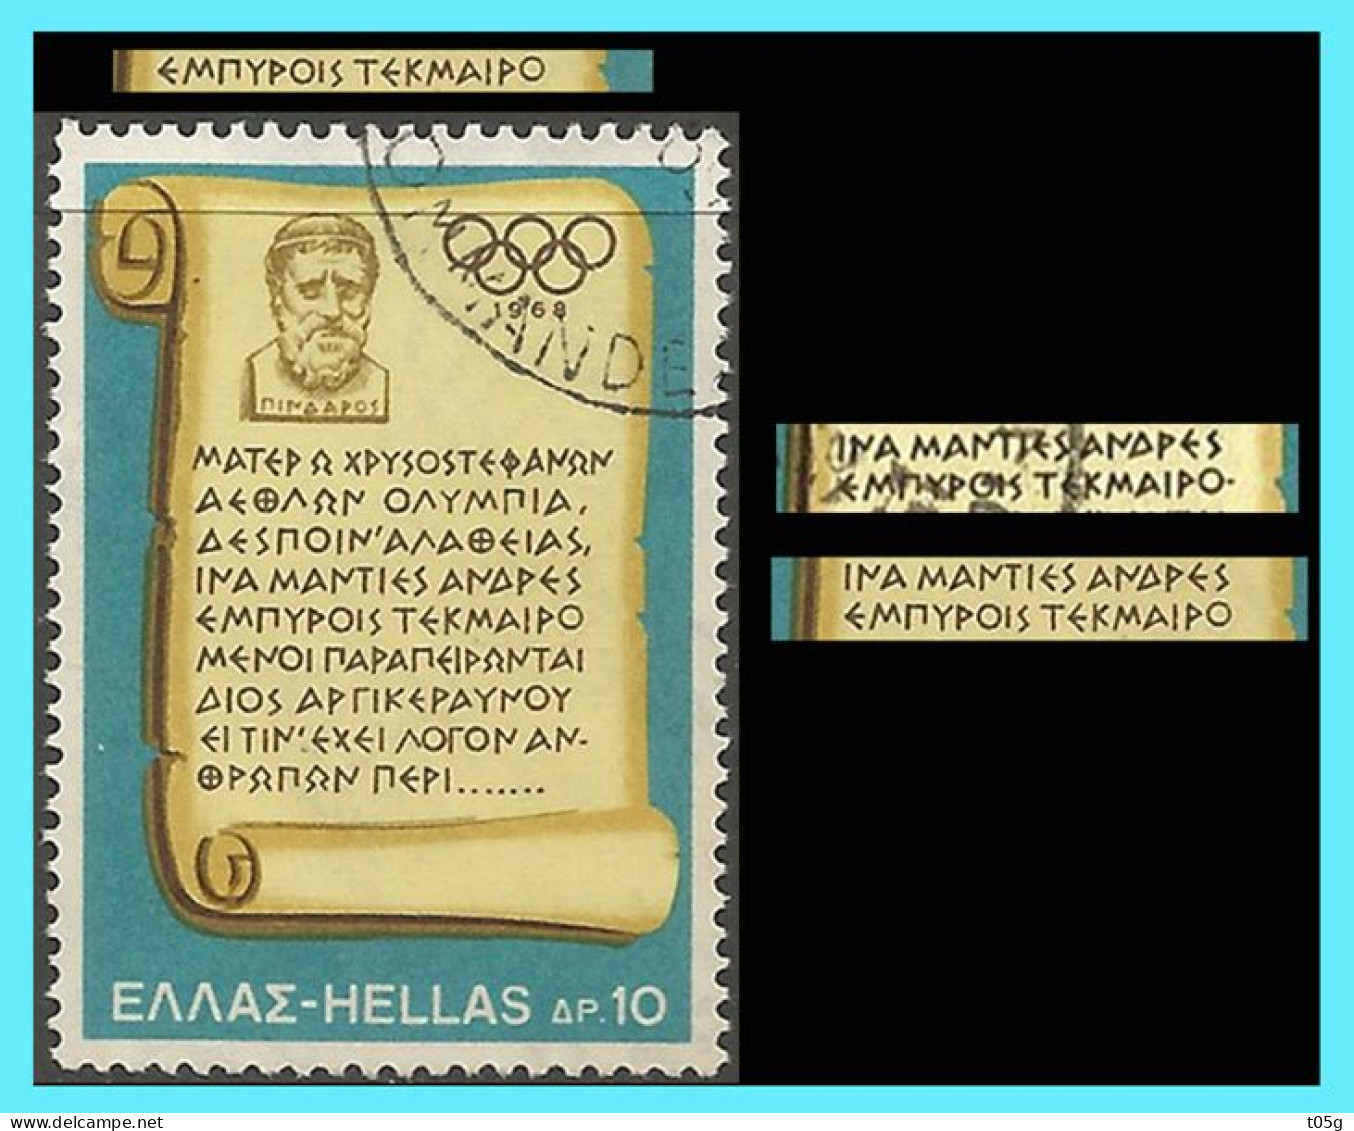 GREECE -GRECE- HELLAS 1968: Stamps (without --) TEKMAIPO Instead Of TEKMAIPO-- "Olympic Games Mexico" - Oblitérés